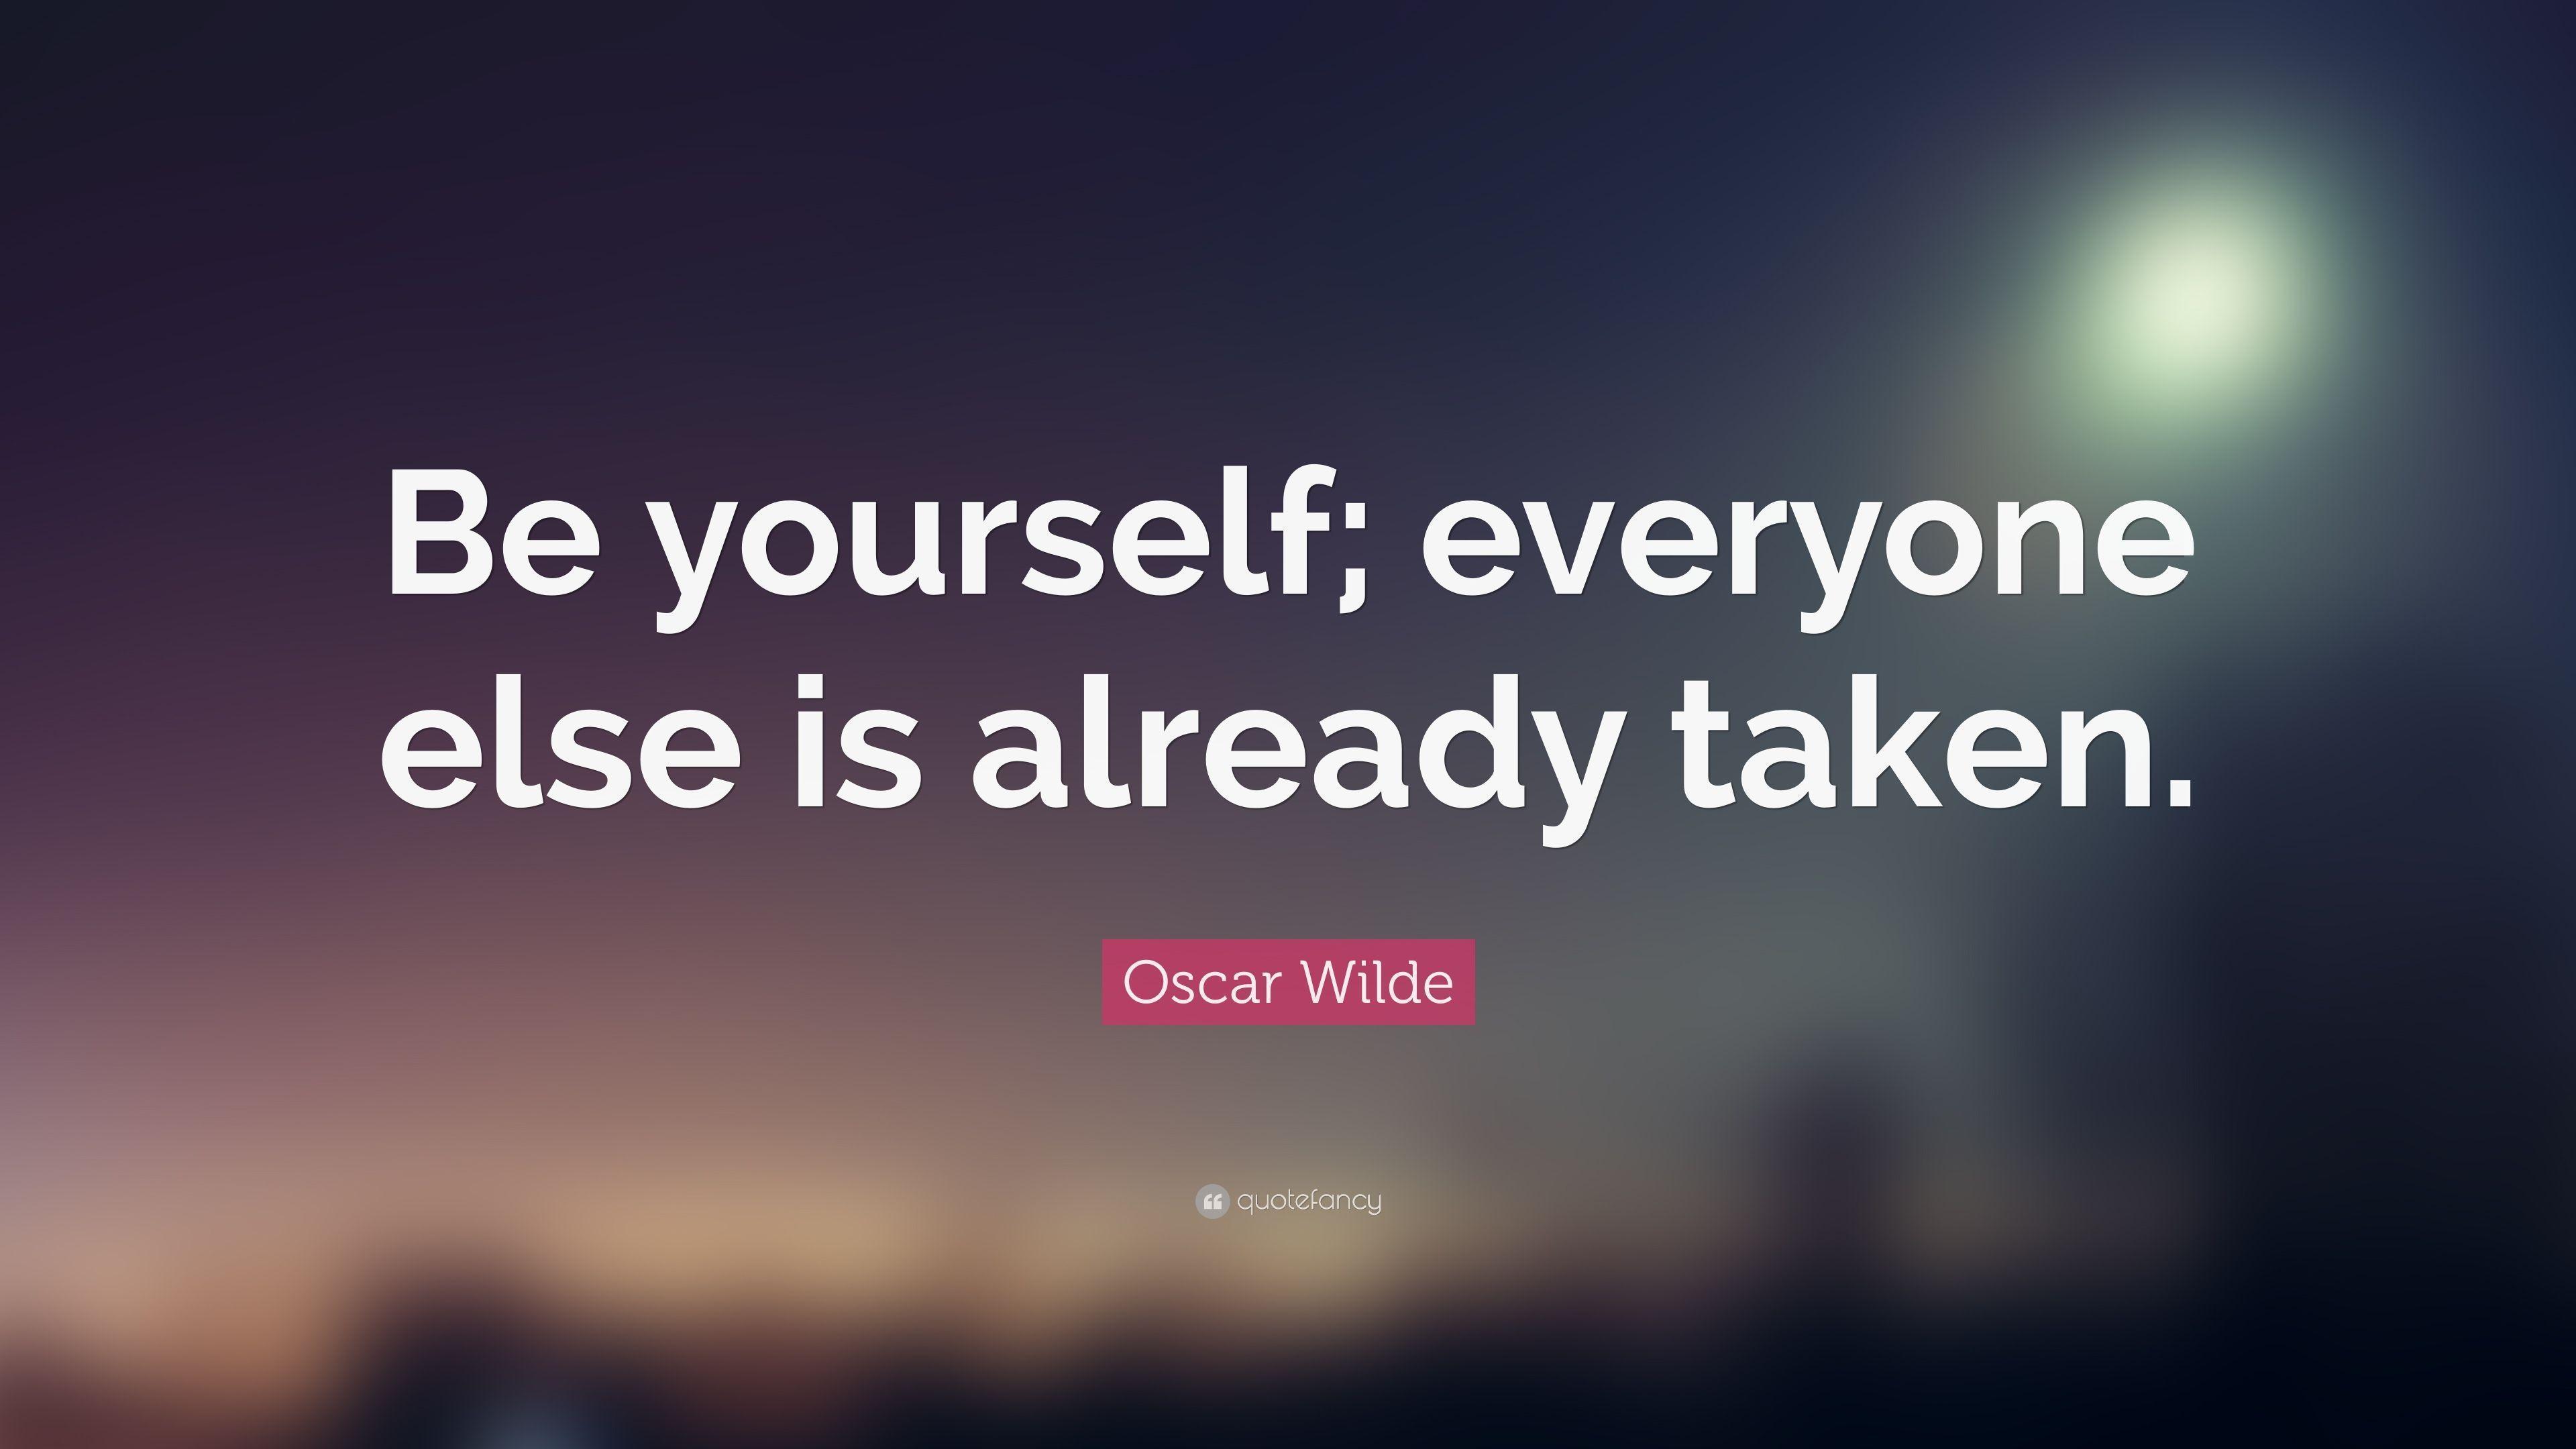 Oscar Wilde Quote: “Be yourself; everyone else is already taken